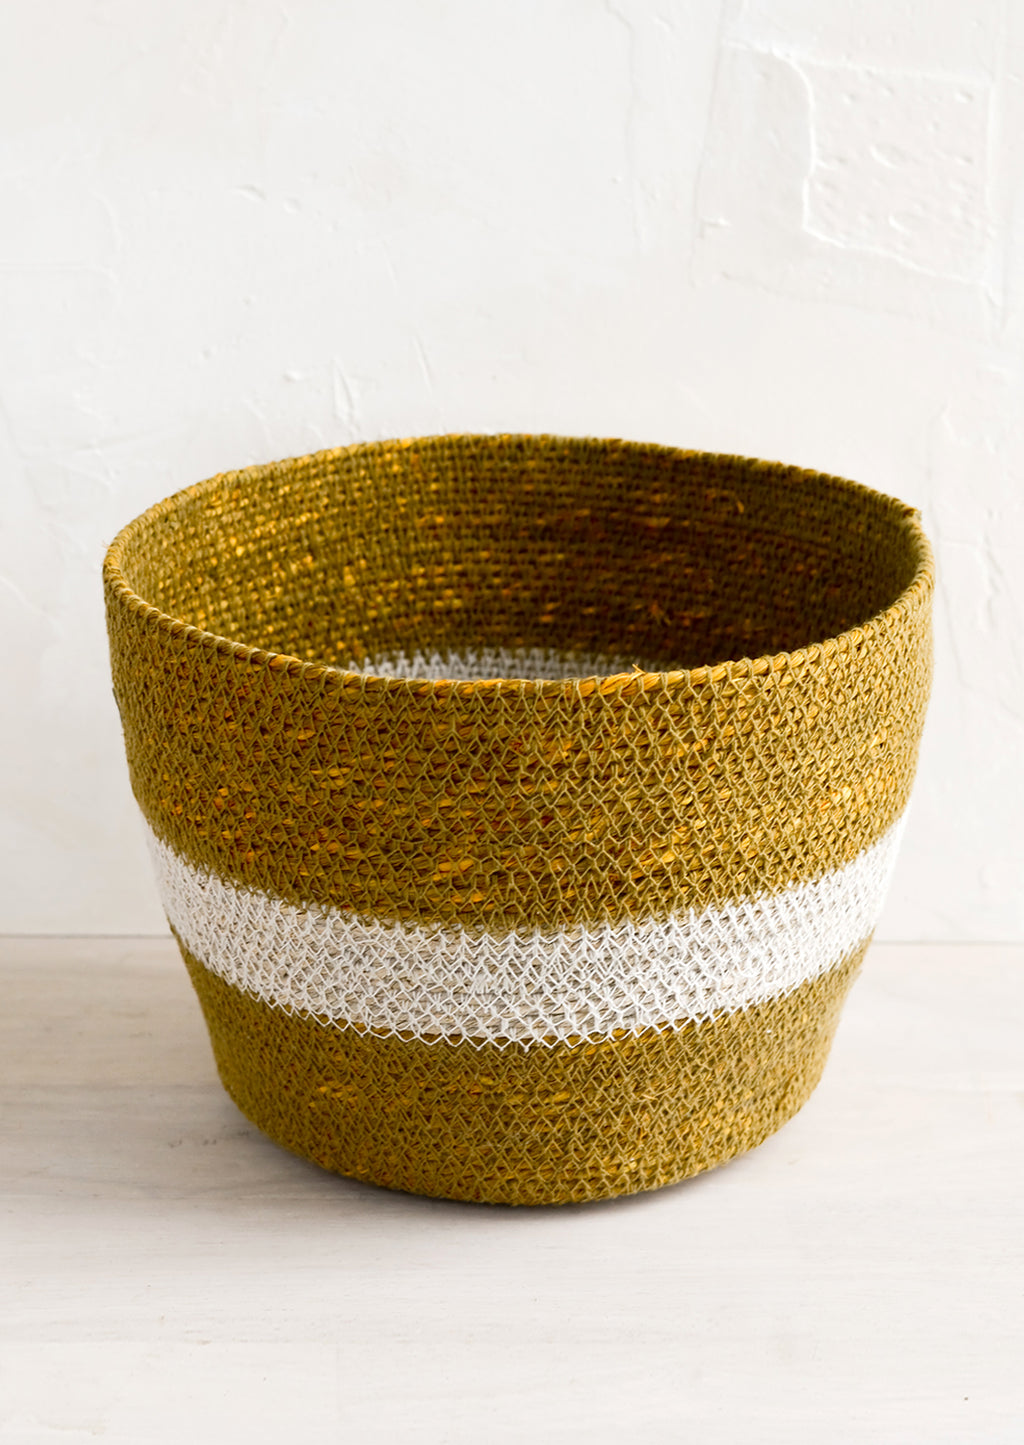 Large / Ochre: A round seagrass storage basket in ochre color with white stripe across middle.